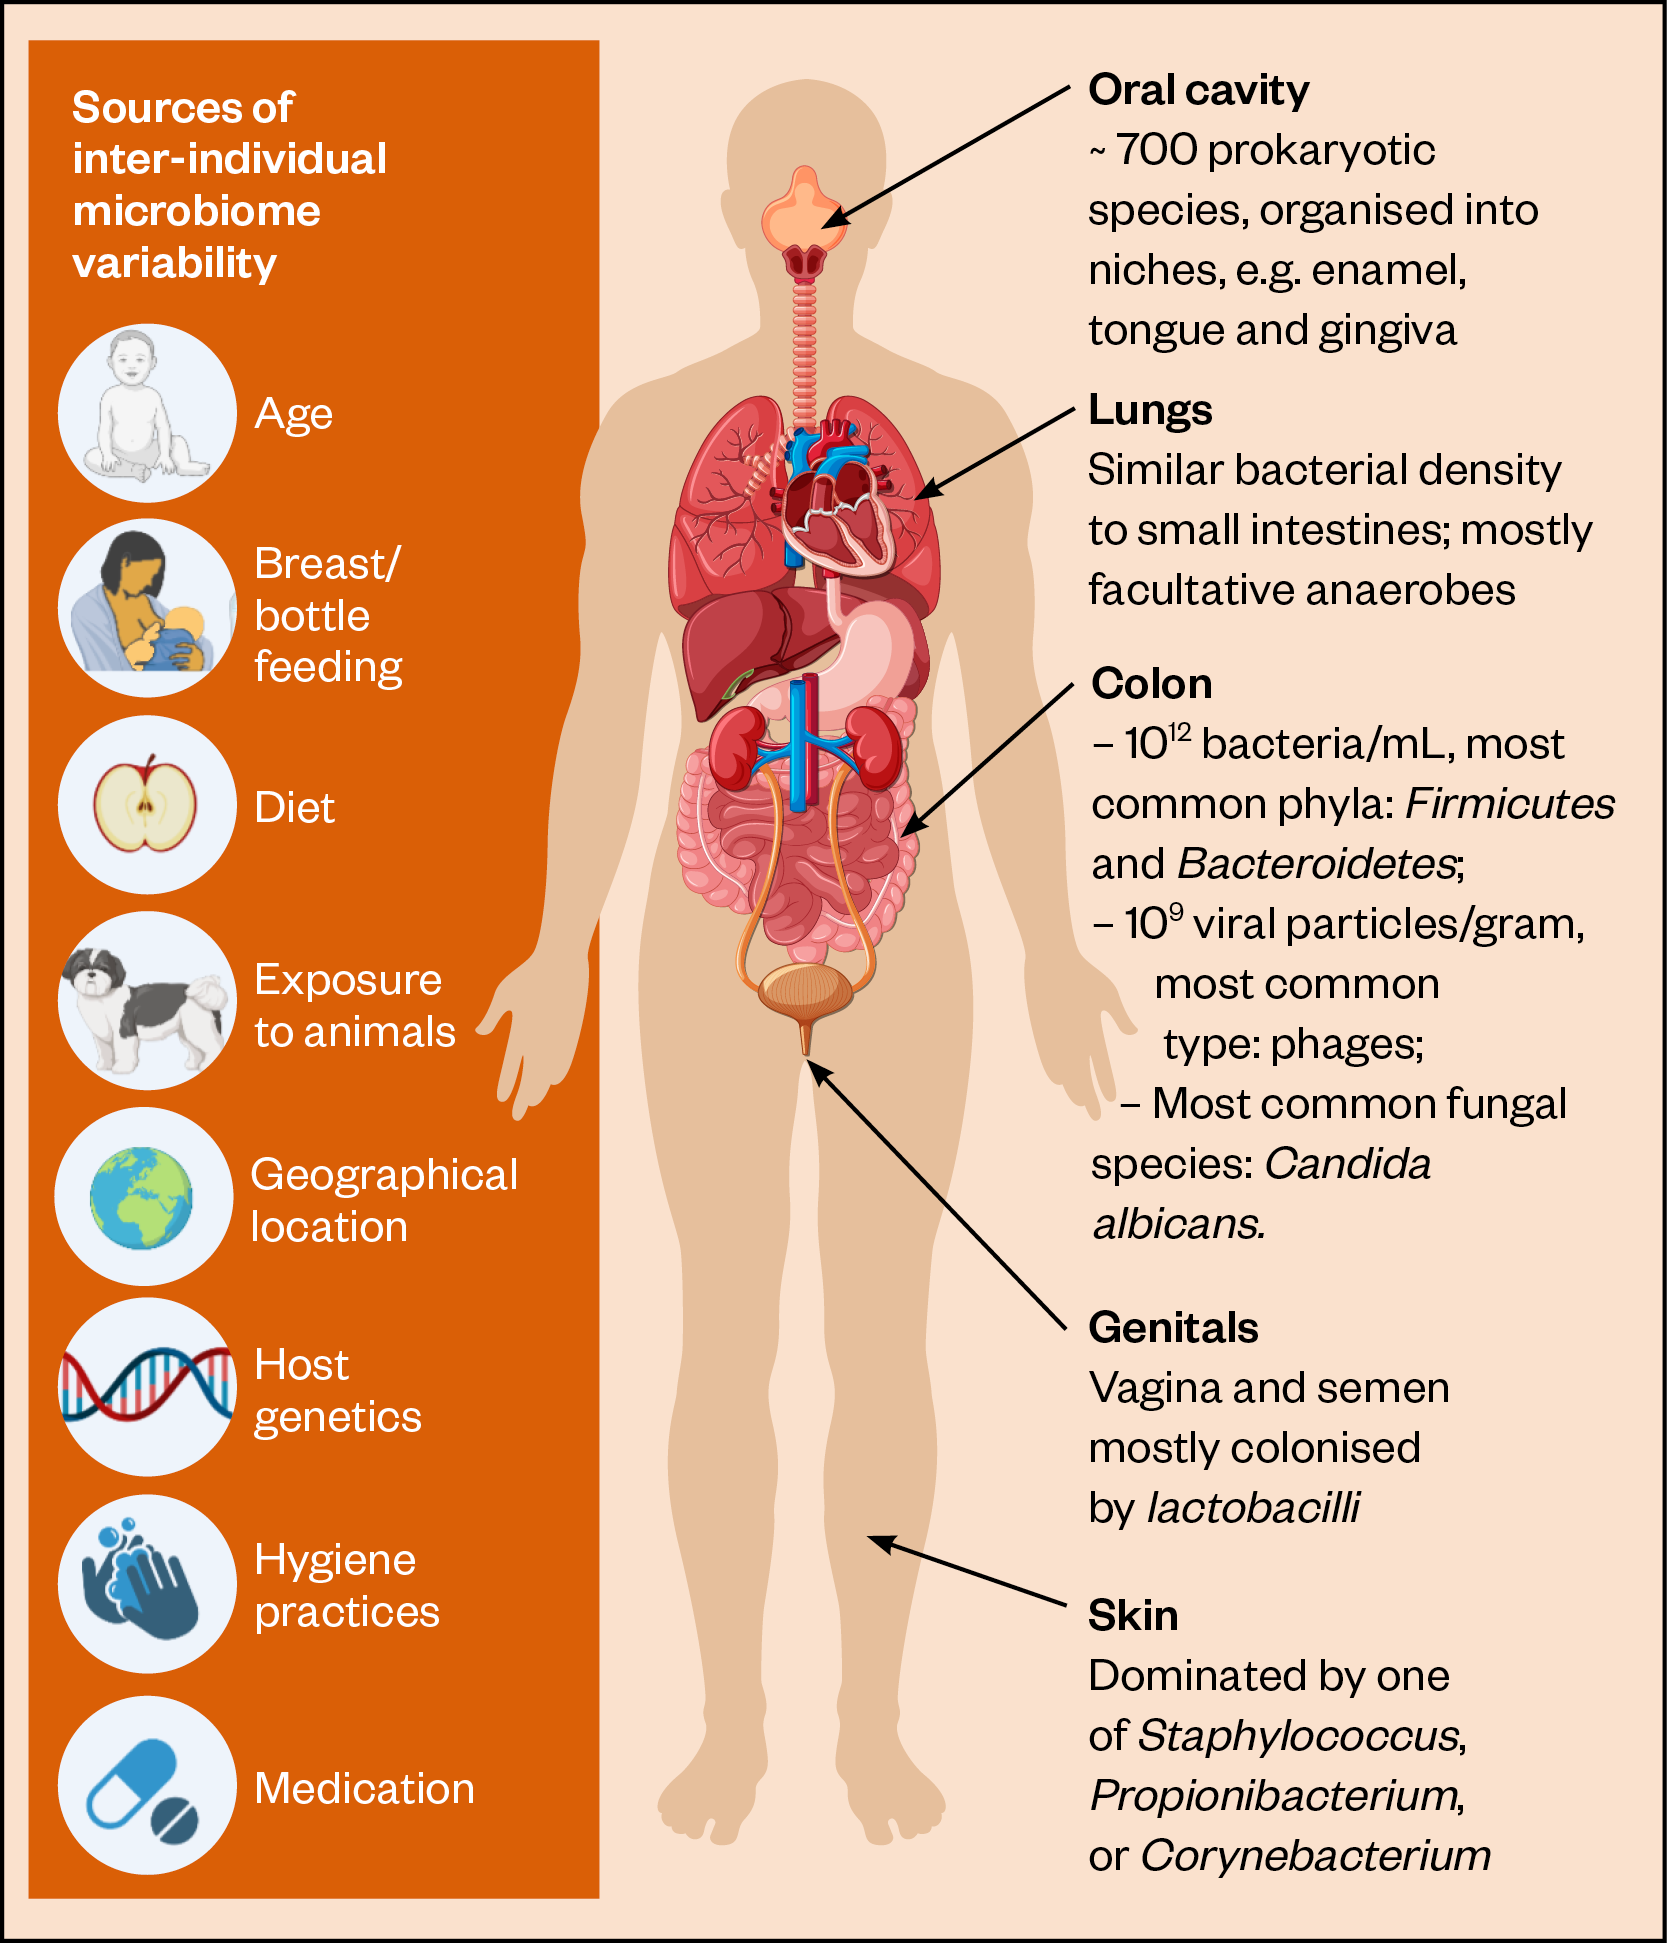 Figure 2: Significant elements of the microbiome at various body sites and sources of inter-individual microbiome variability